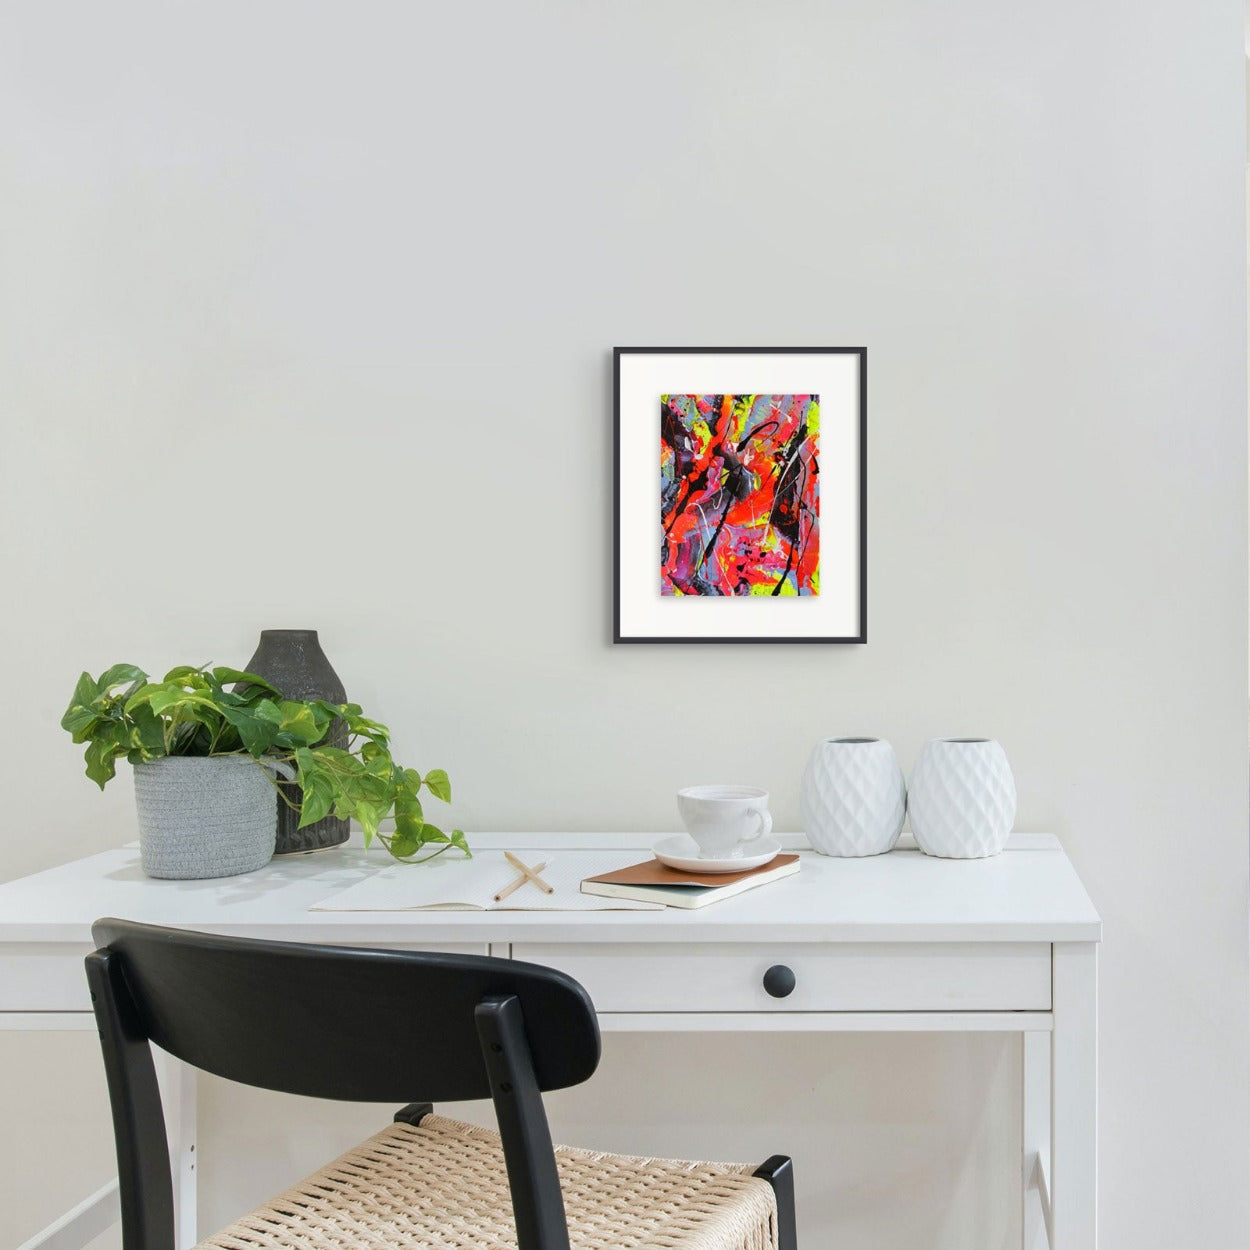 Little Luxuries IV, original art by Bridget Bradley visualized  hanging on white wall above white console with modern decor.